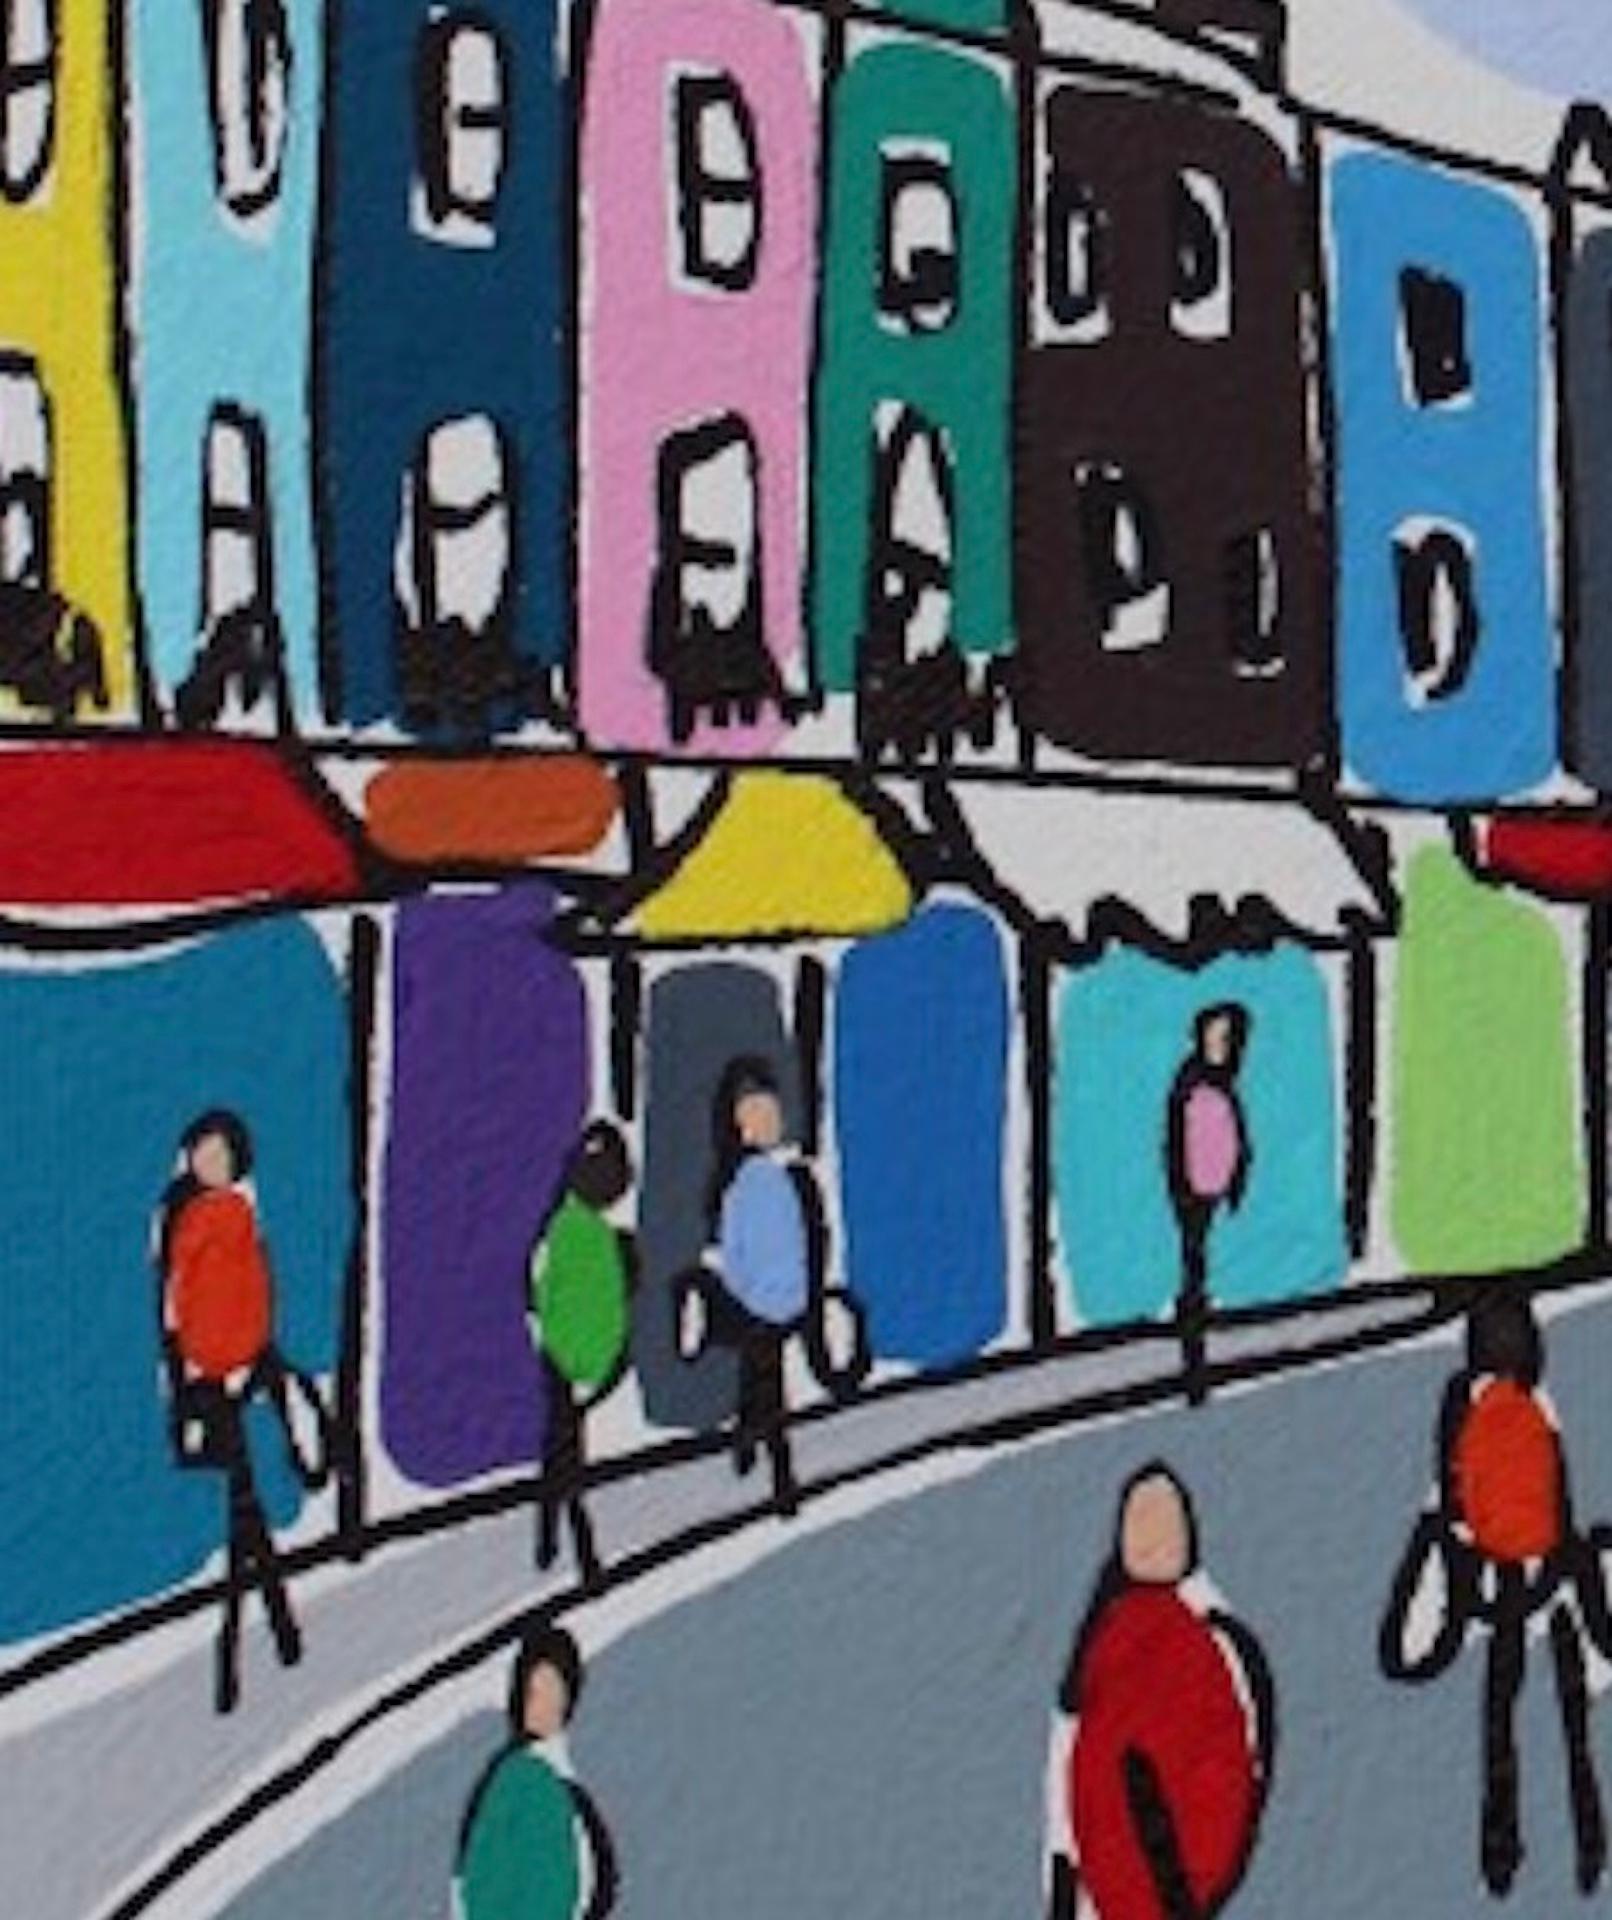 Mini Portobello Shop Fronts [2021]
original

Acrylic on Canvas

Image size: H:30 cm x W:25 cm

Complete Size of Unframed Work: H:30 cm x W:25 cm x D:4cm

Sold Unframed

Please note that insitu images are purely an indication of how a piece may